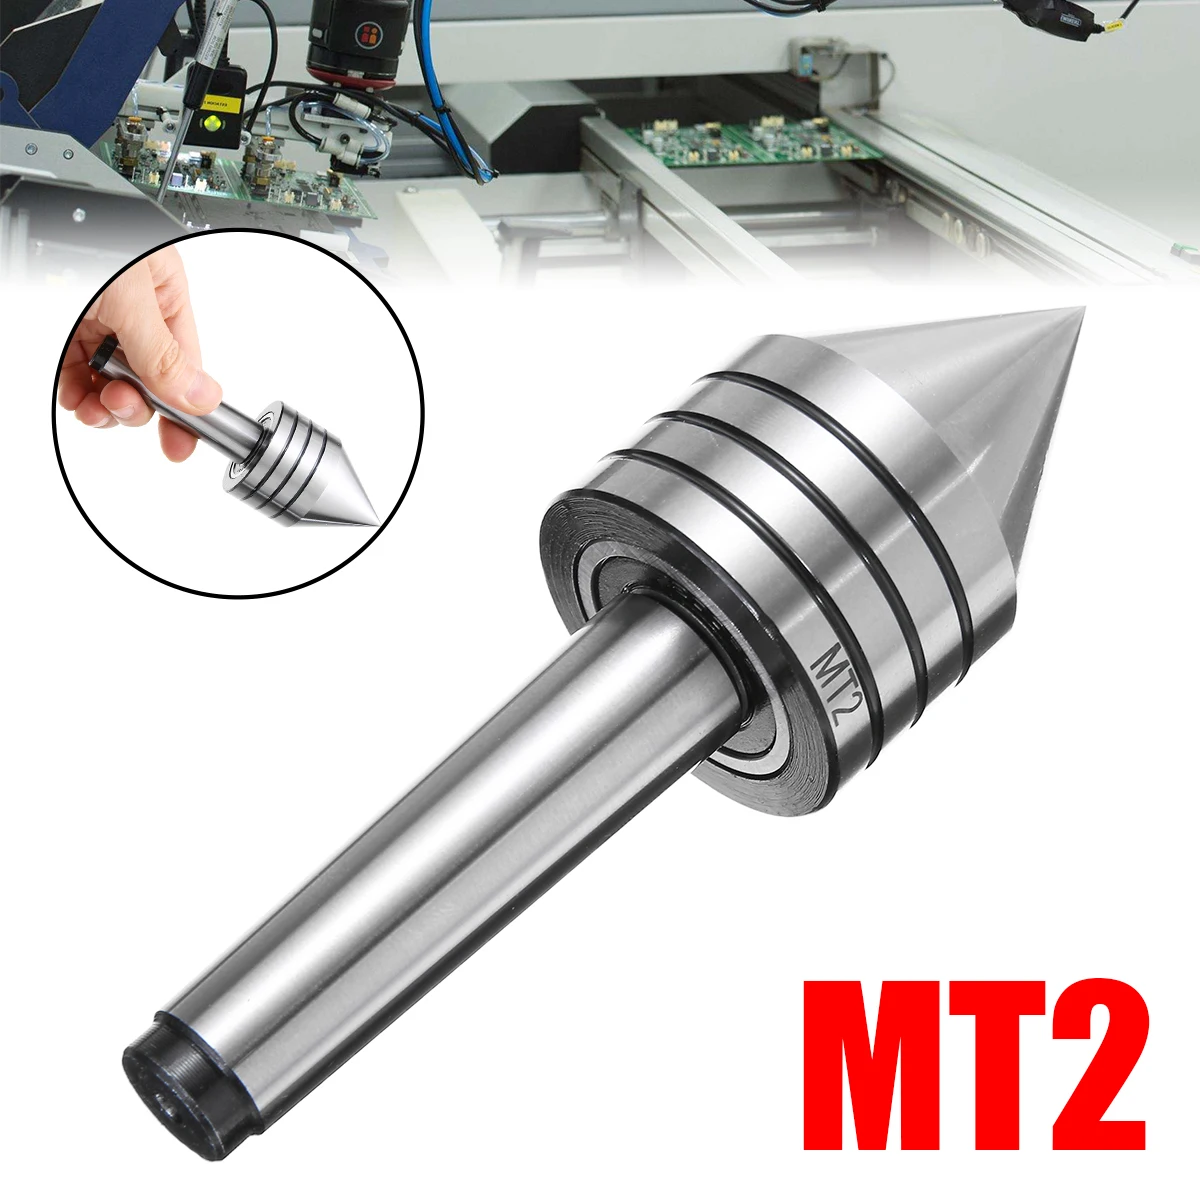 ALTBET MT1 MT2 Live Center Mose Taper #1#2 60 DEG Heavy Duty Precision Rotary for CNC Woodworking Lathe MT2 